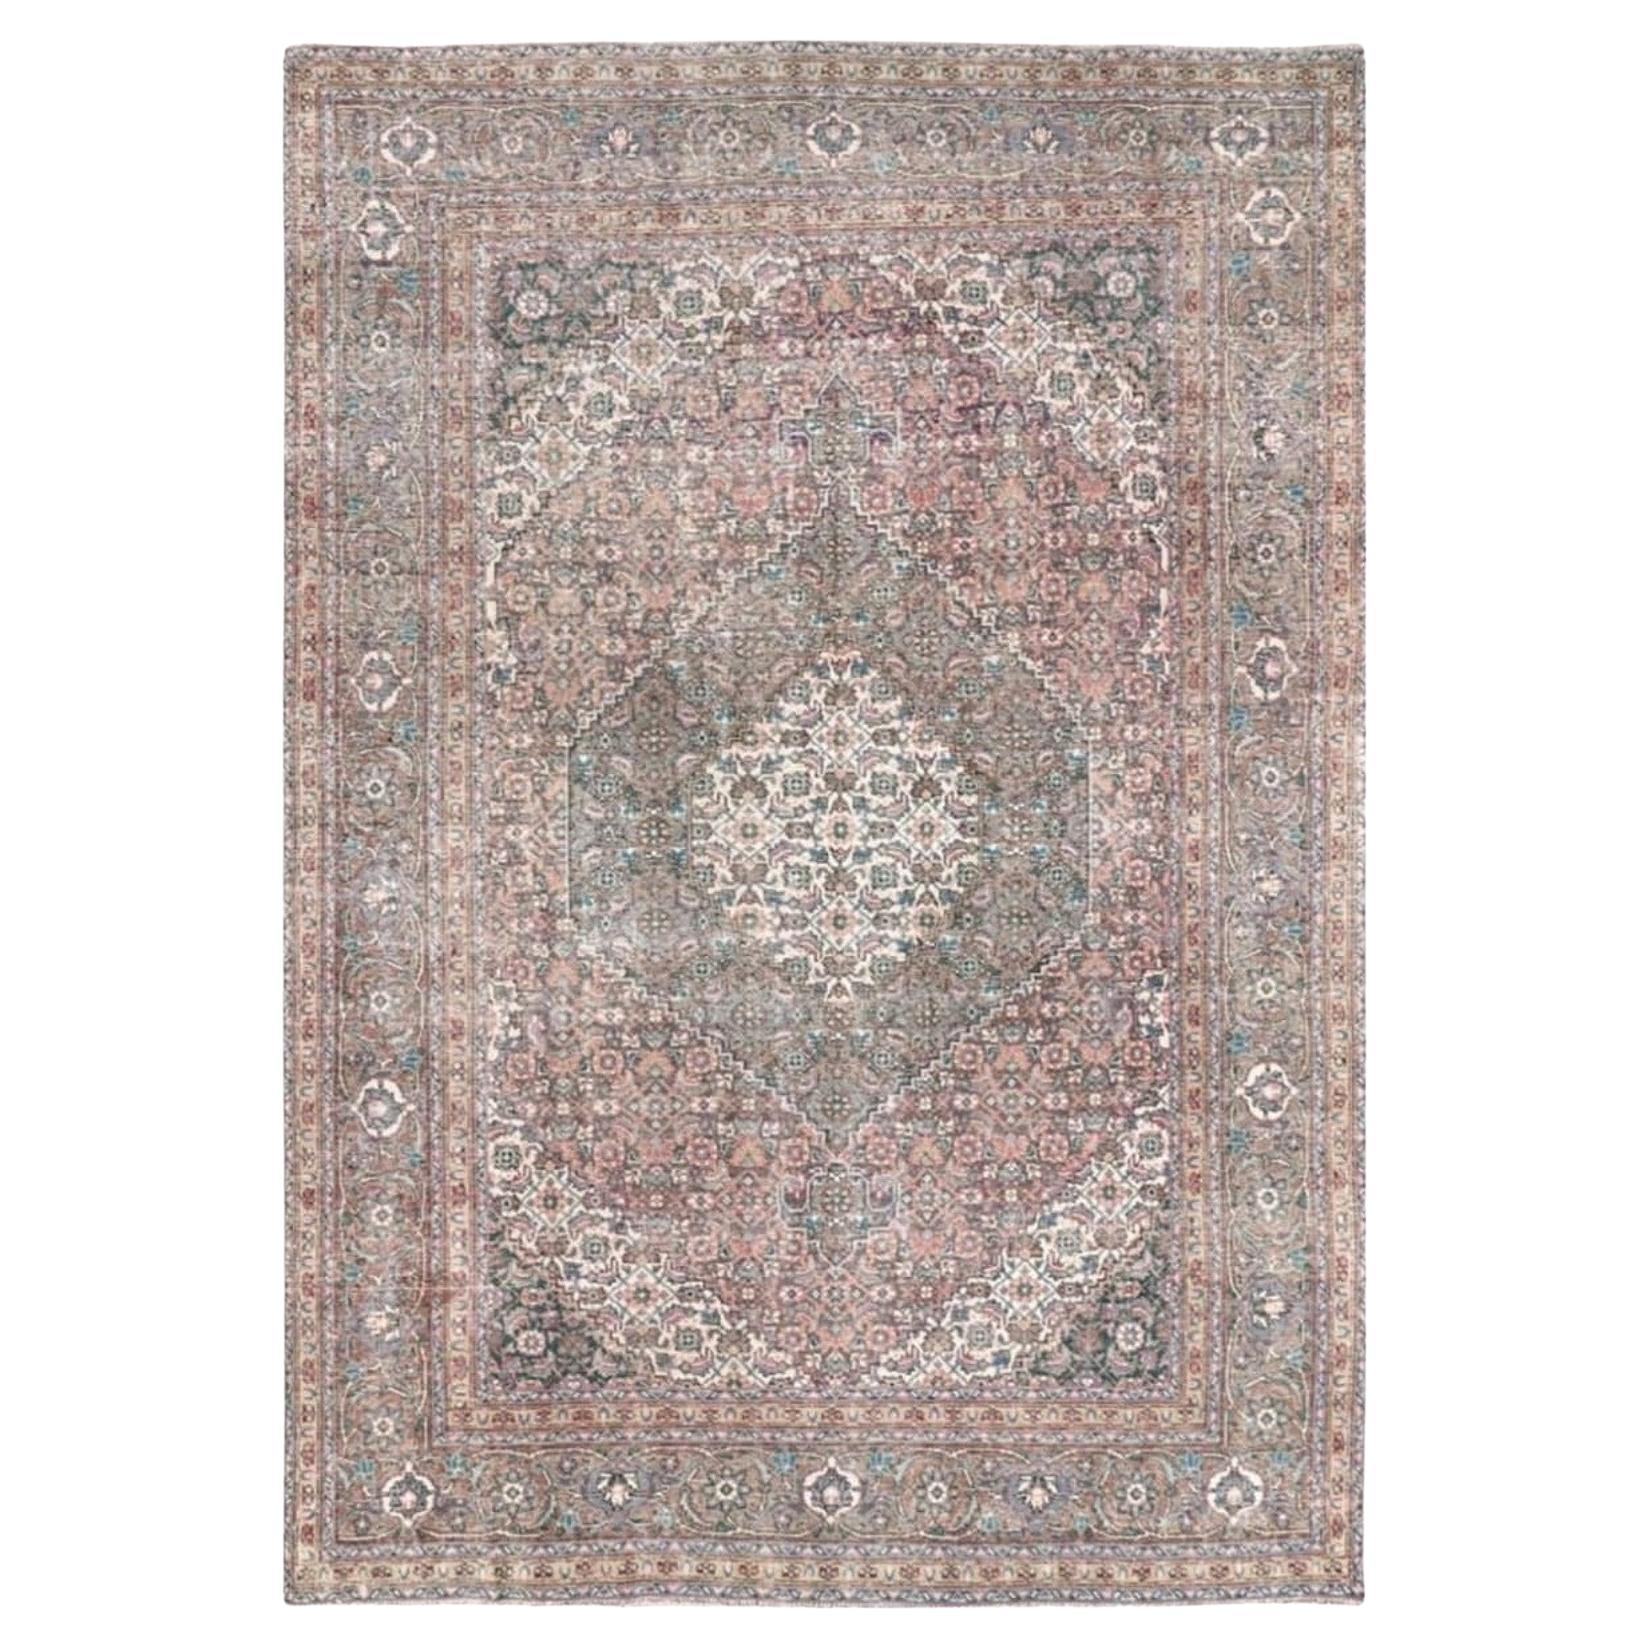  Tabriz Vintage Rug 8x12 ft Hand Knotsted Room Size Wool Muted Colors 360x250 cm